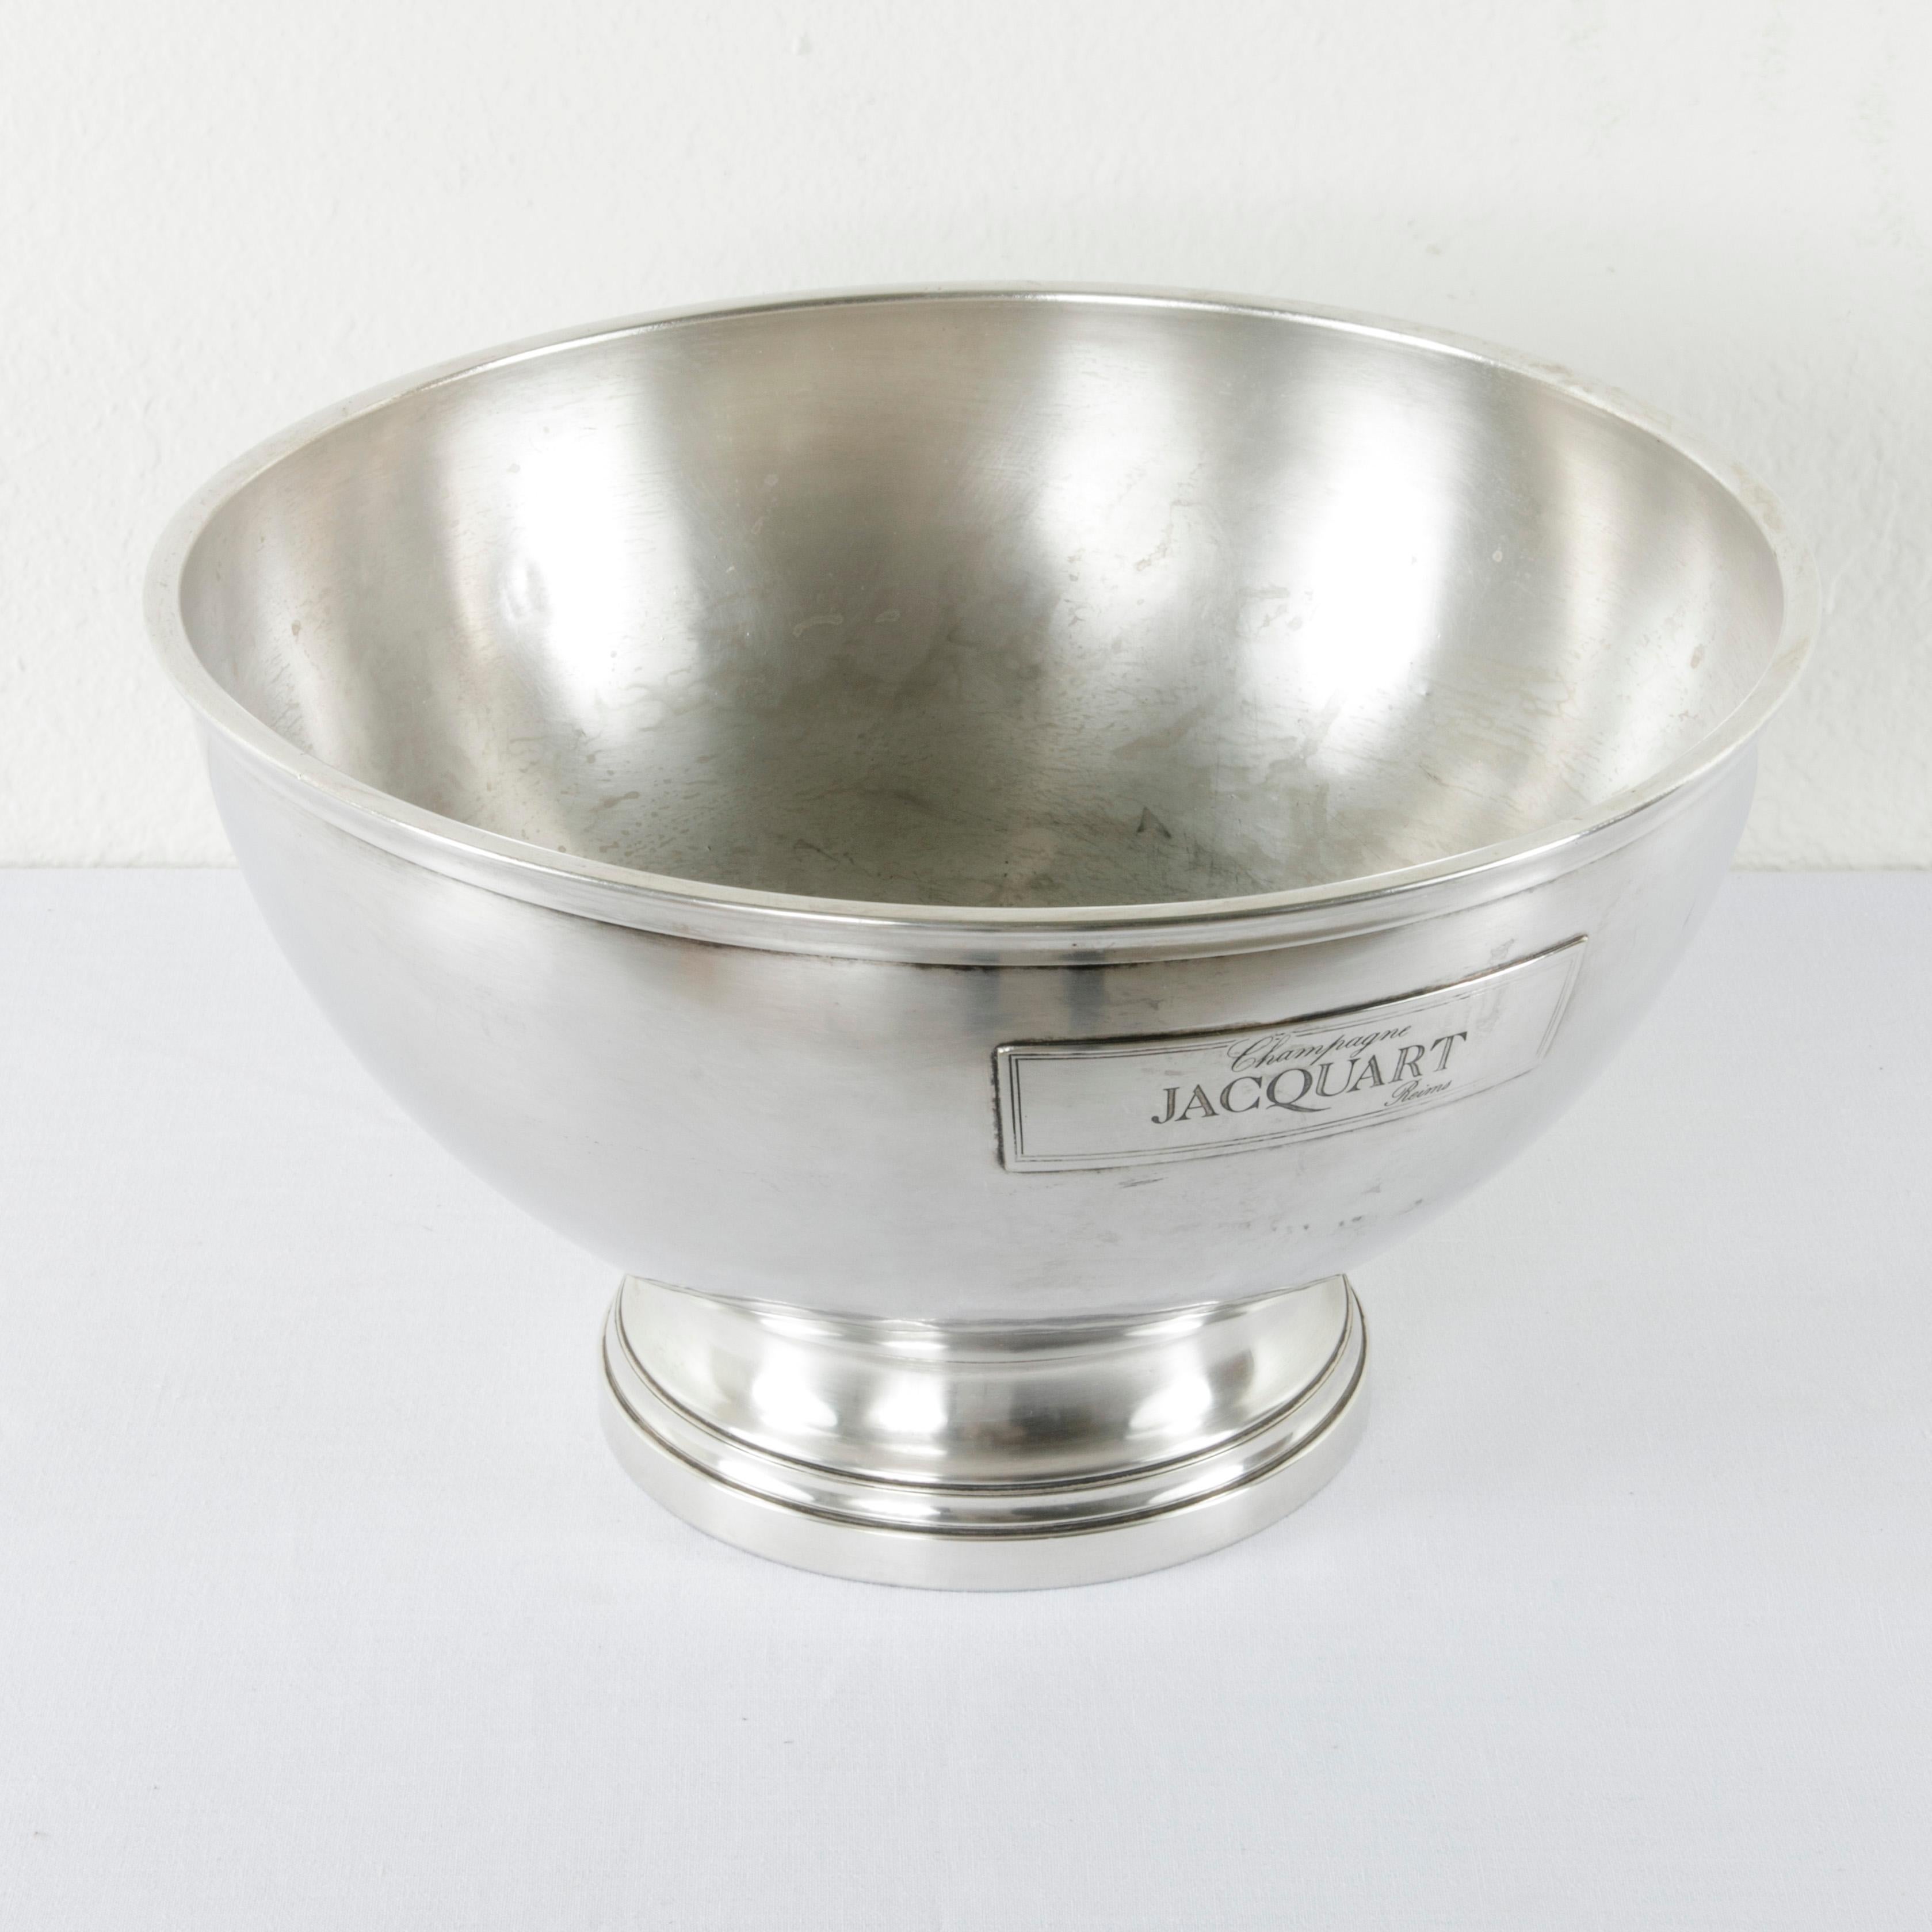 This large midcentury French silver plate hotel champagne bucket features a label on both sides with the name of the champagne producer, Jacquart, and the city of origin, Reims, in the Champagne region of France. A silver plate hallmark with a